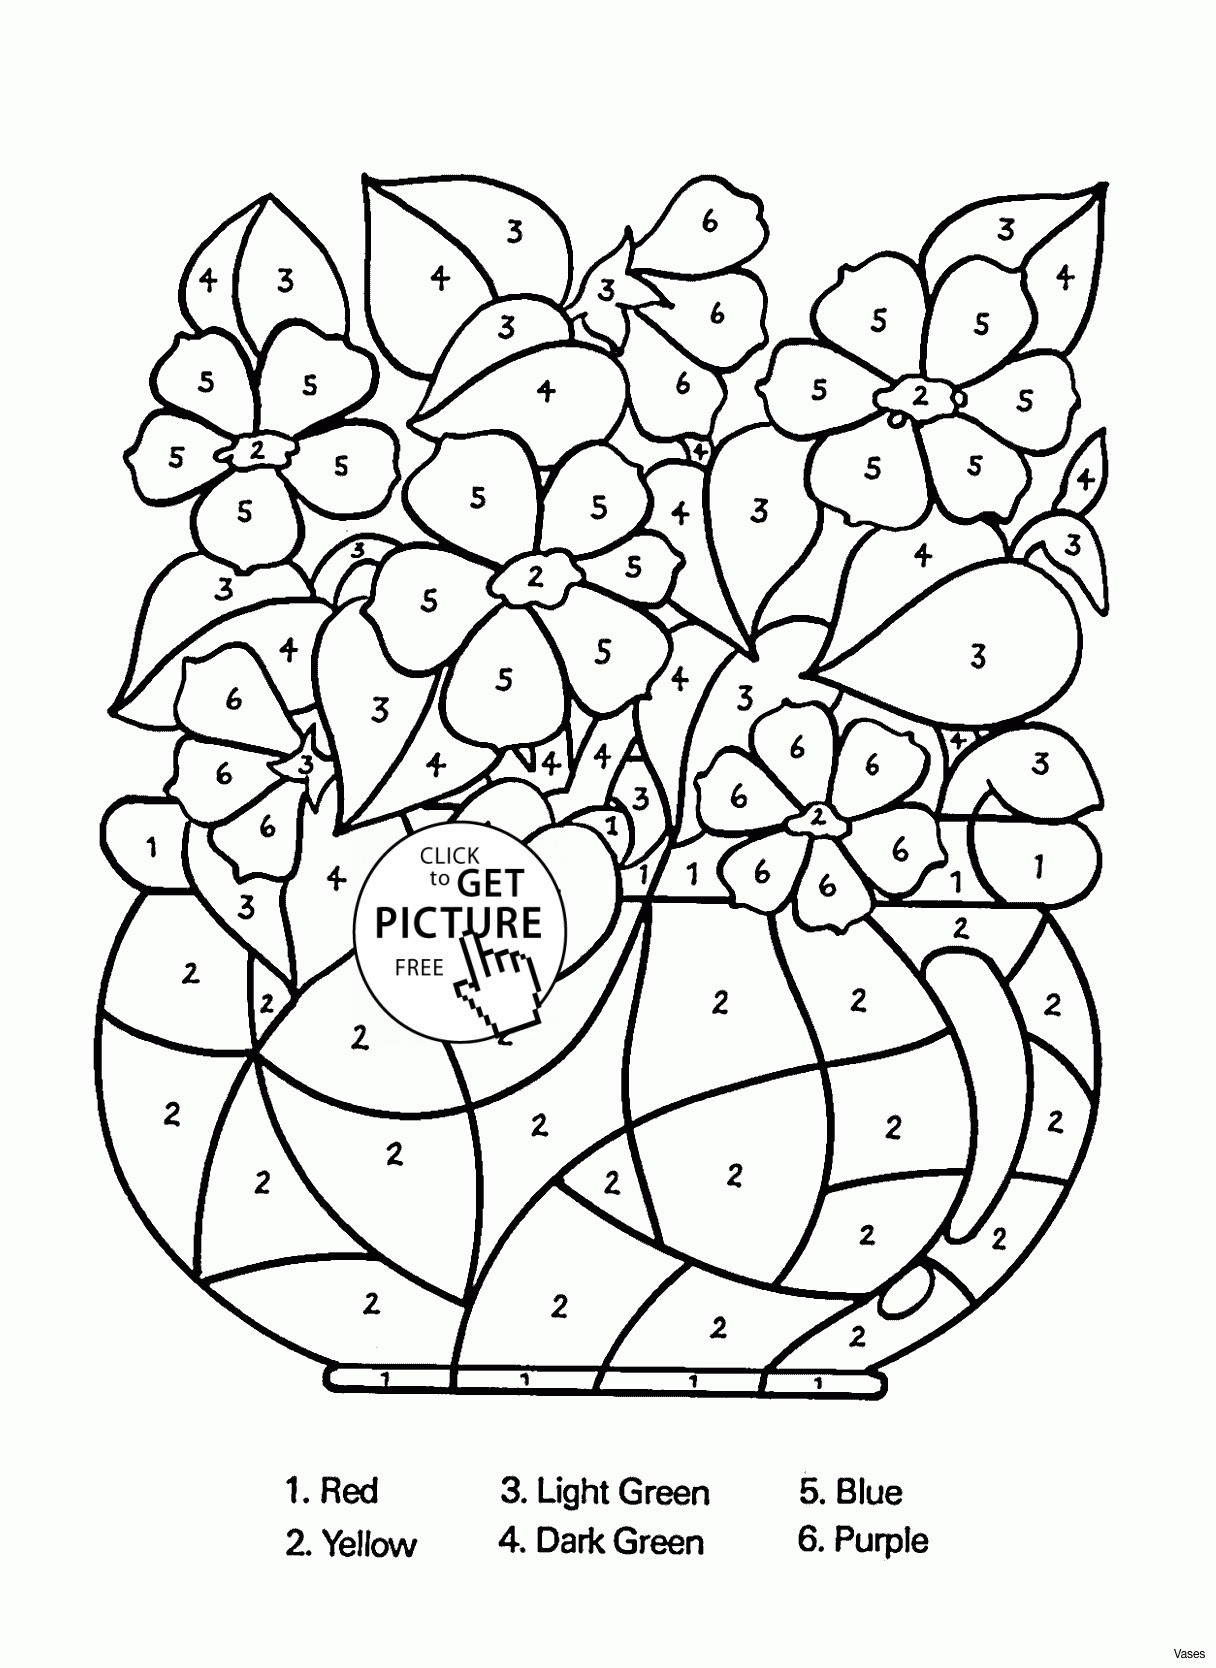 Coloring Flowers Elegant Fresh Coloring Pages Flowers and butterflies Collection